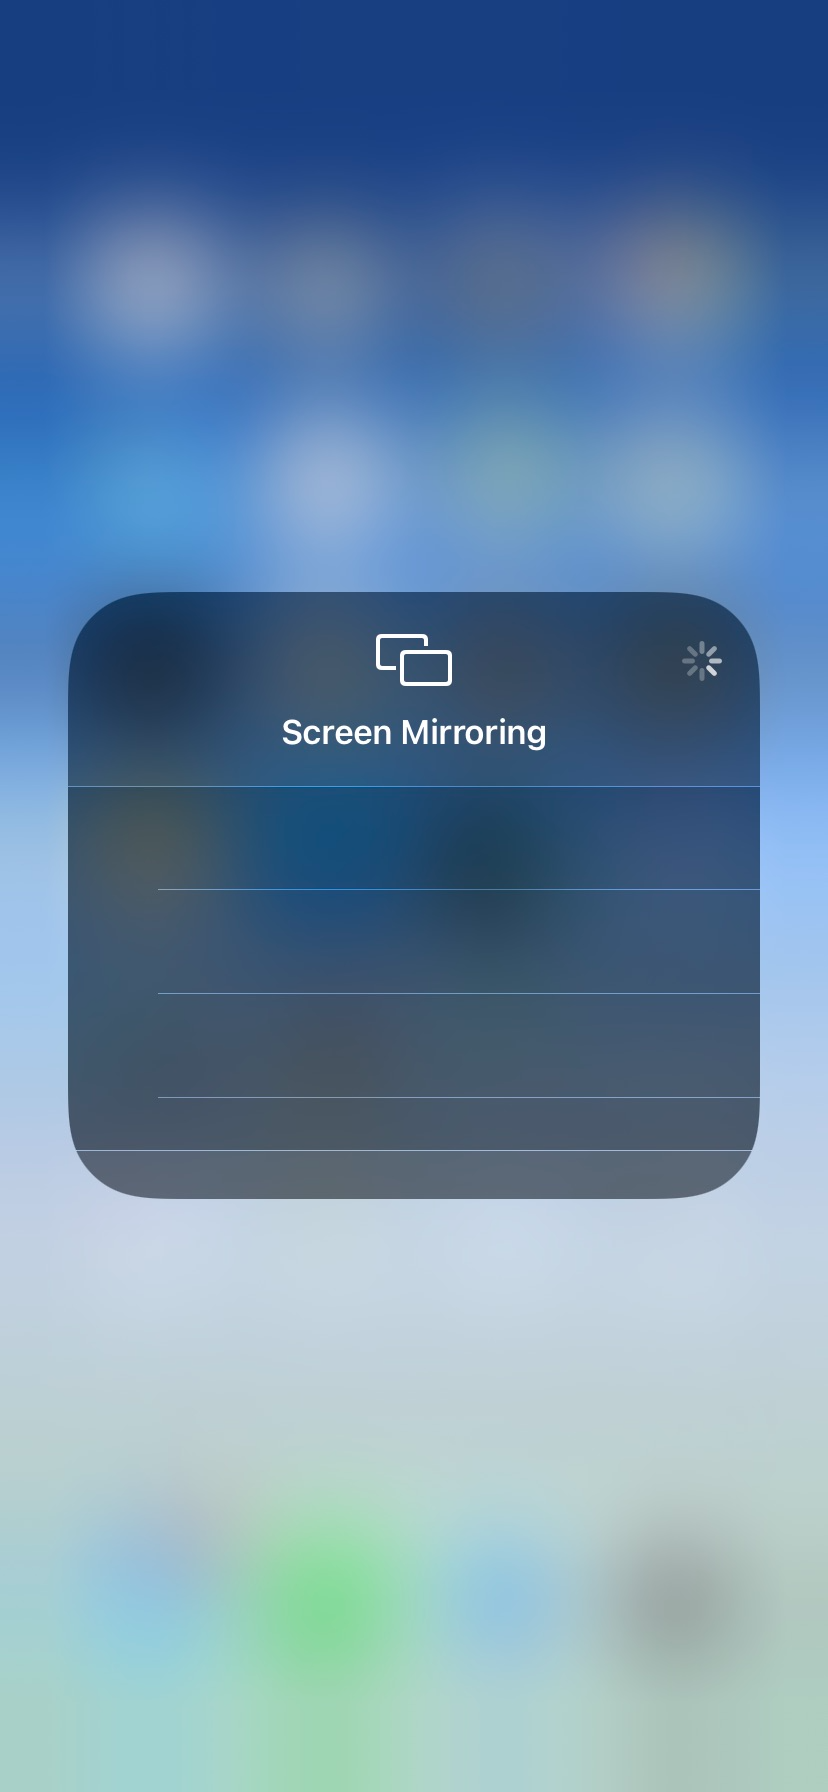 Can T Turn Off Screen Mirroring Apple, How To Turn Off Screen Mirroring On Ipad Mini